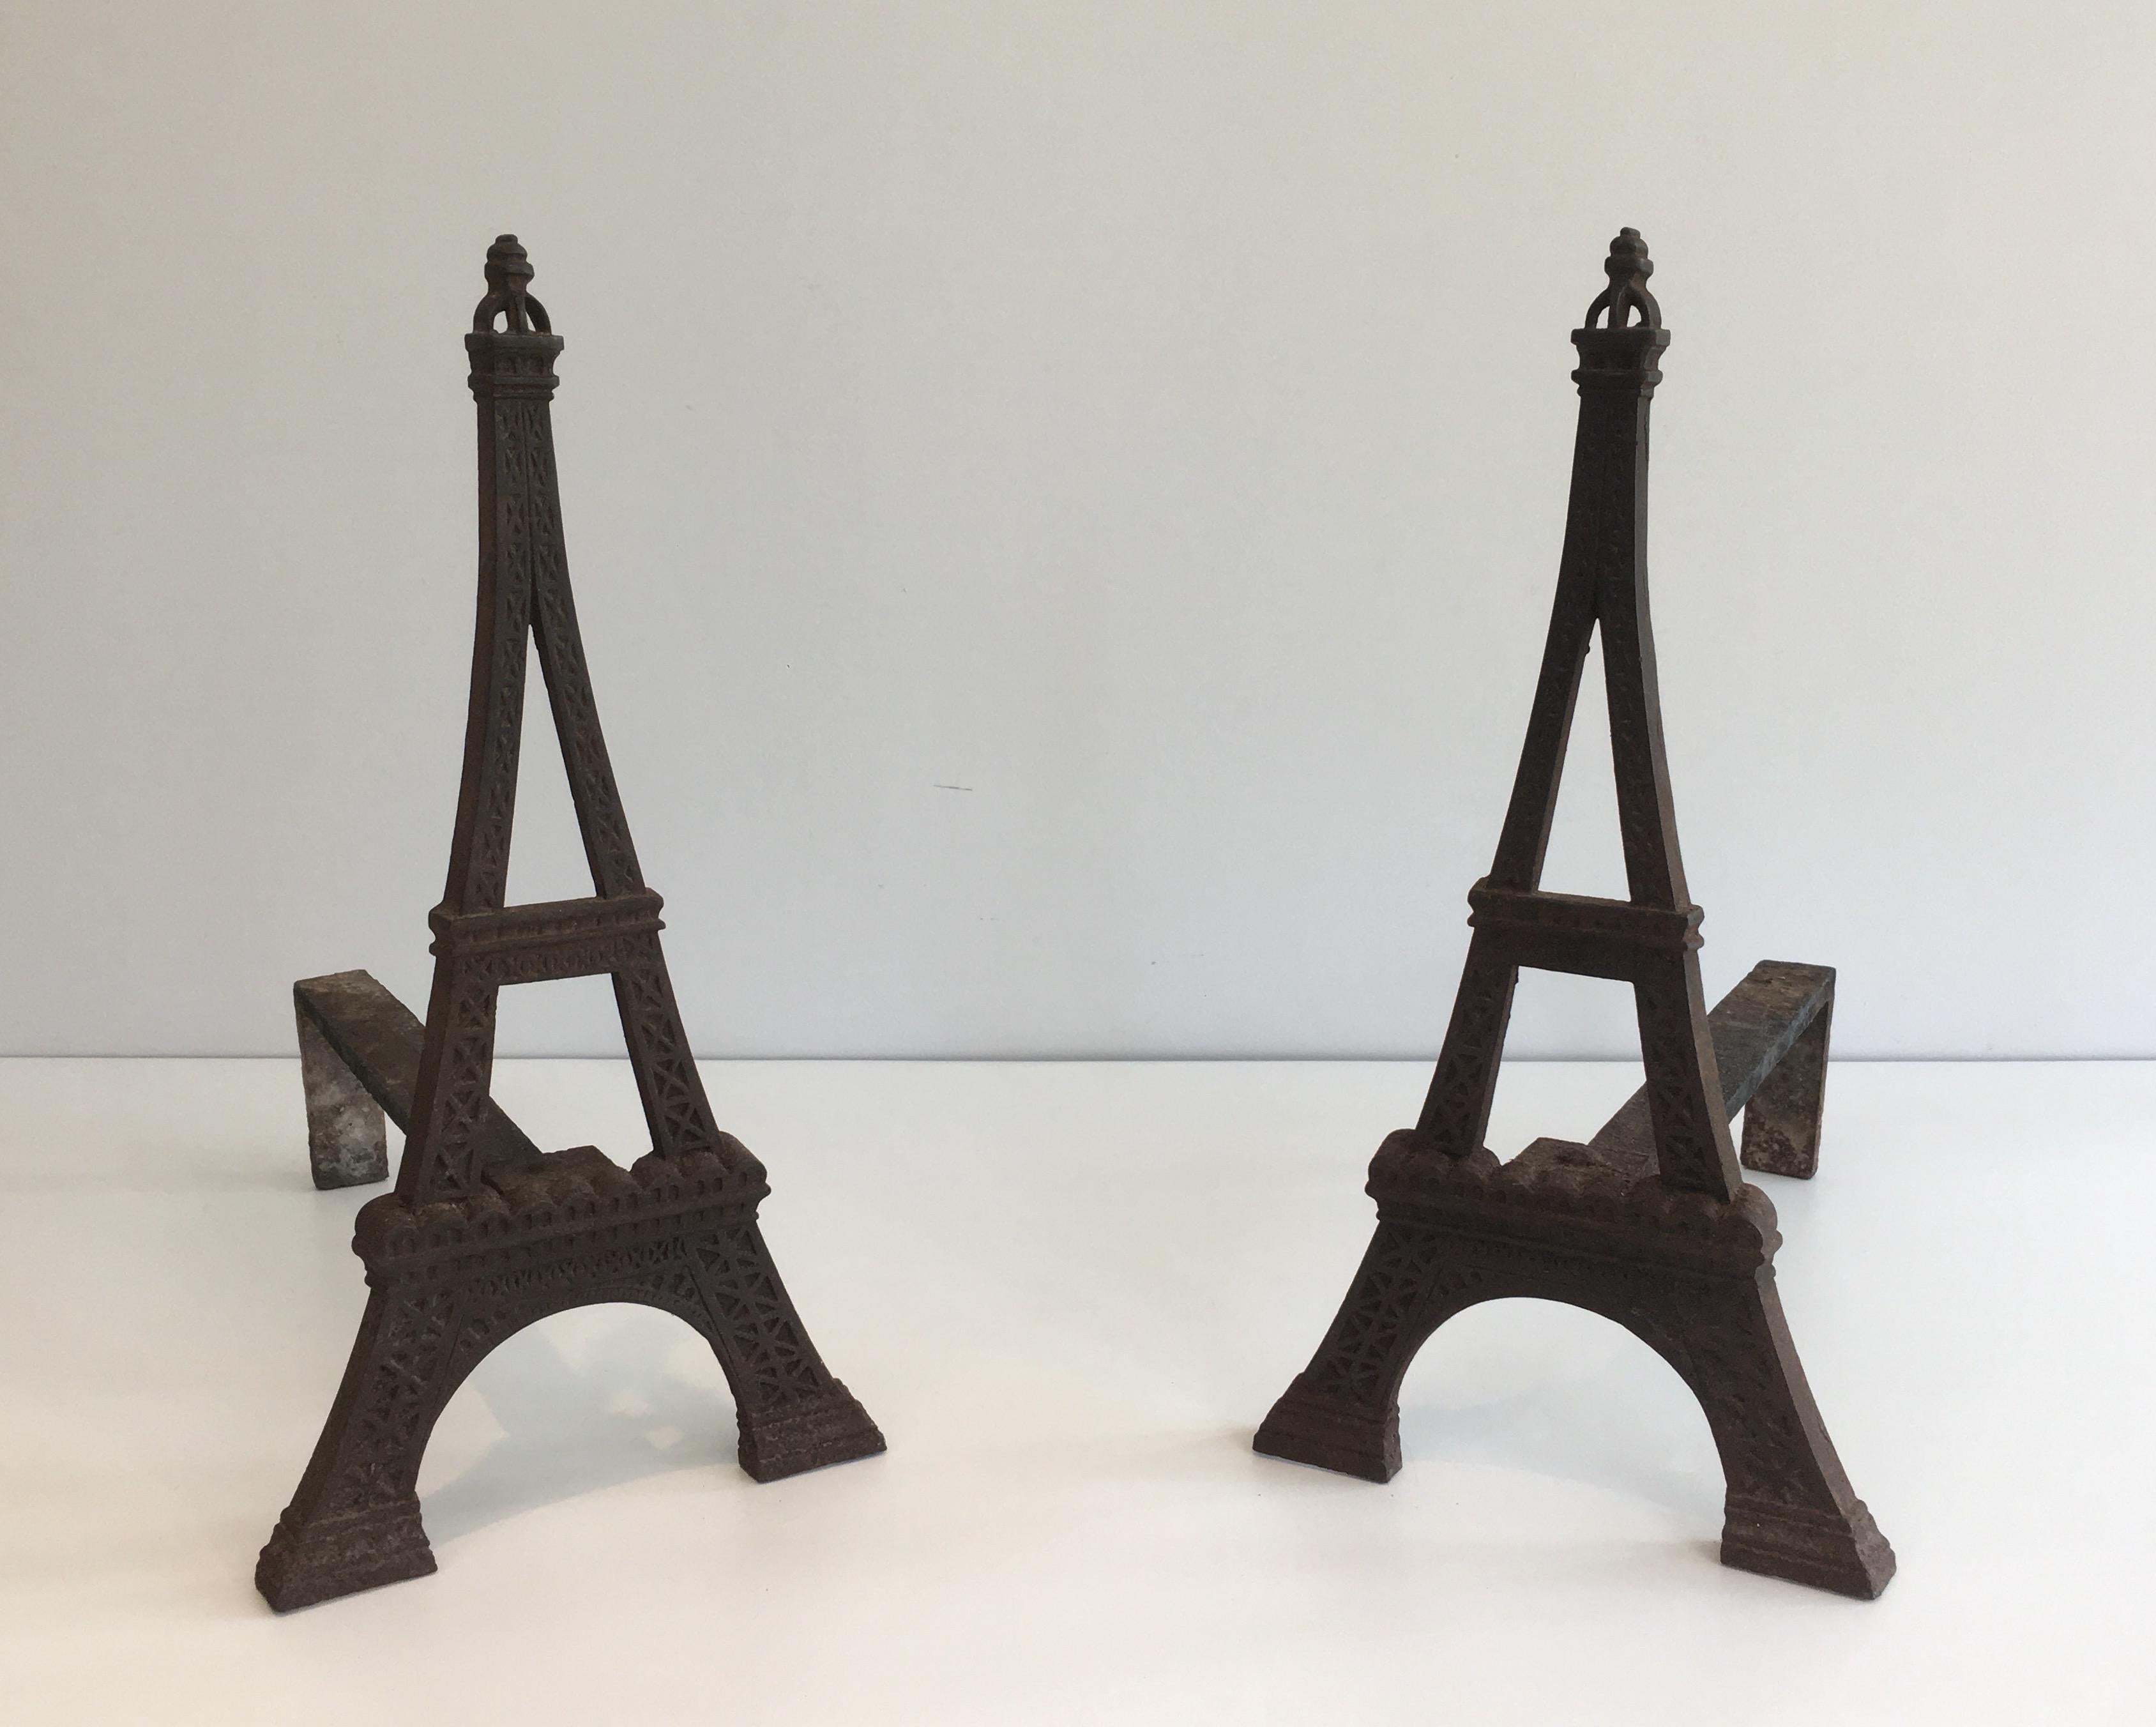 This very rare Eiffel Tower andirons are made of cast iron and wrought iron. This is a French. Work, circa 1900.